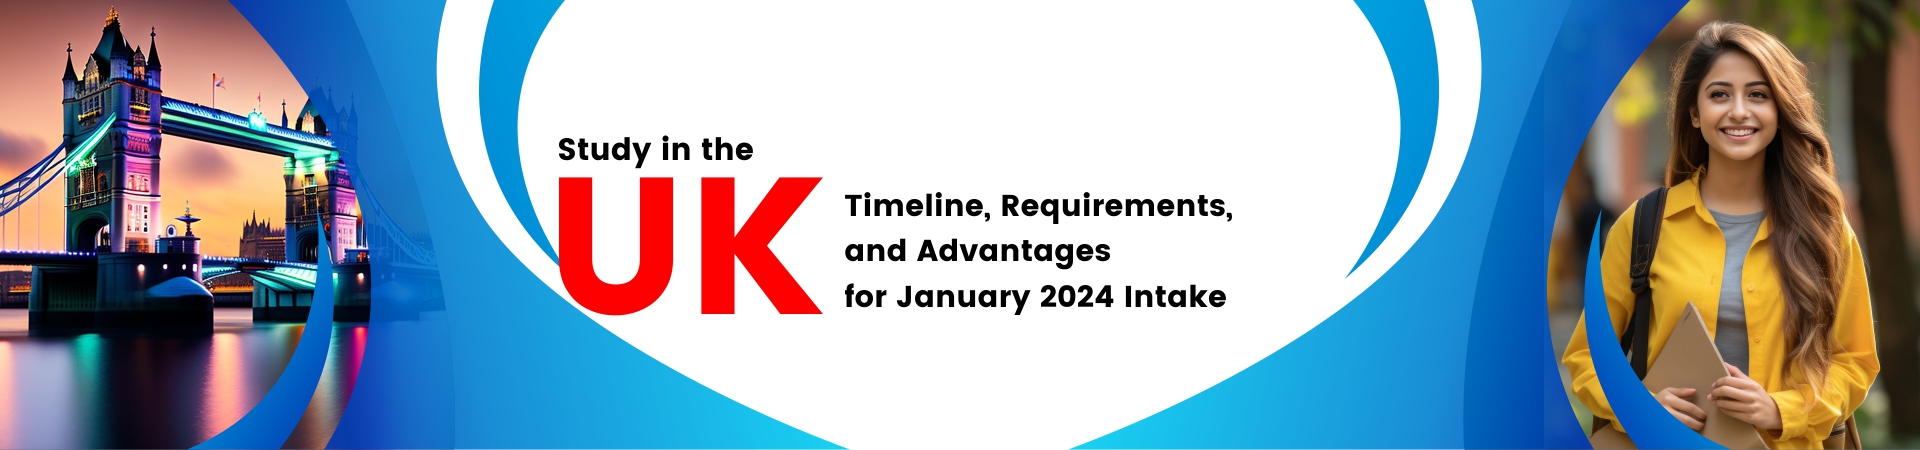 Study in the UK: Timeline, Requirements, and Advantages for January 2024 Intake